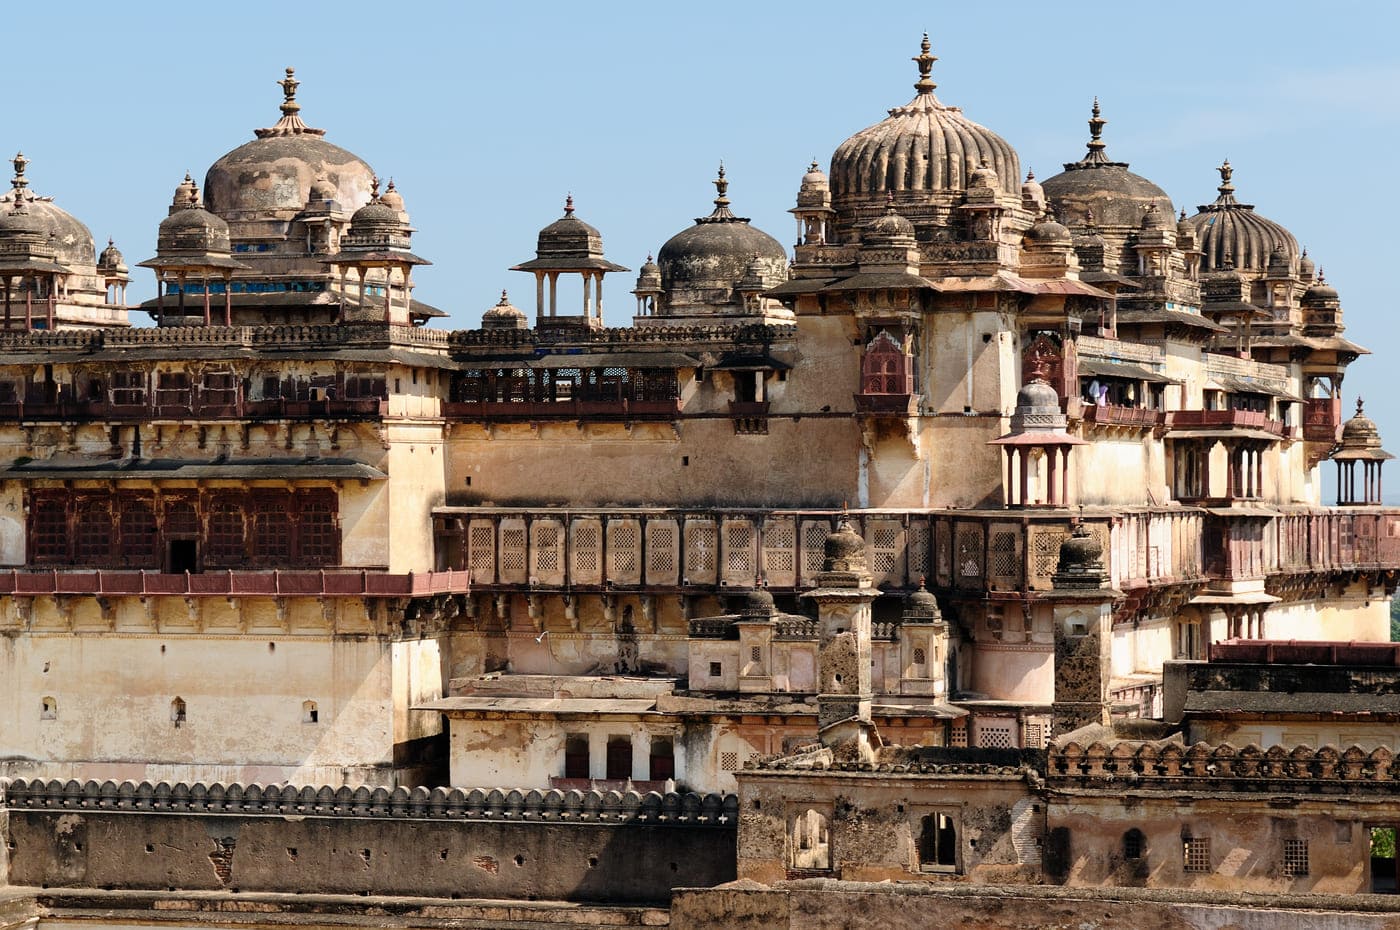 Fusing elements of Bundela and Mughal architecture, the Jahangir Palace is named so by Raja Bir Singh Deo after the Mughal emperor to show solidarity towards him, Orchha 